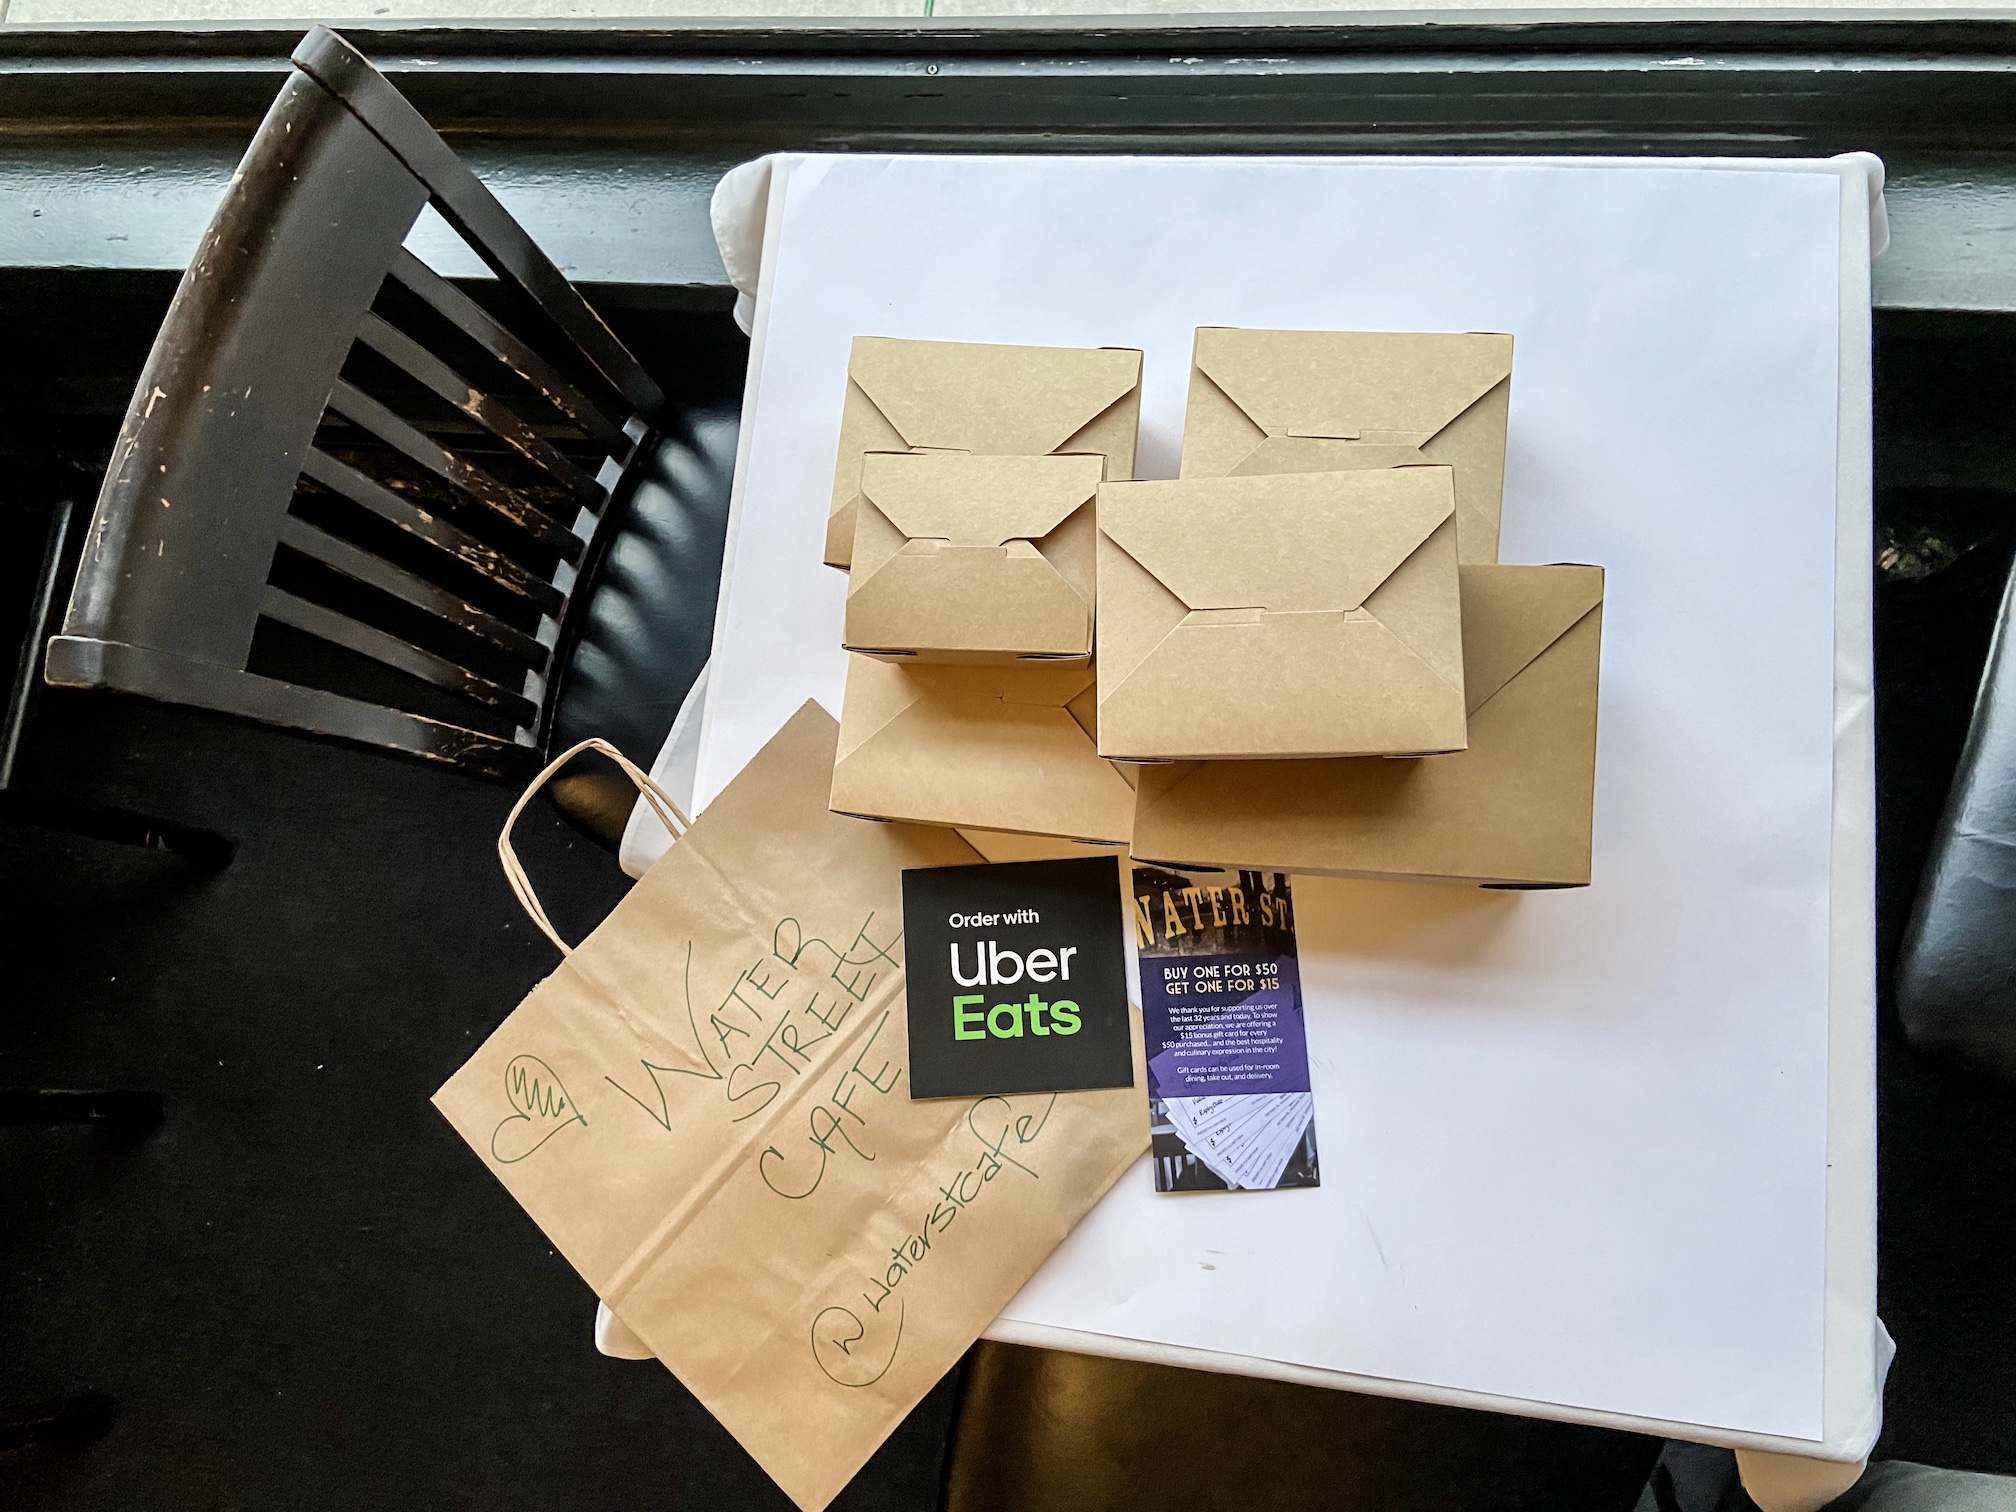 Order from Water St Cafe through Uber Eats